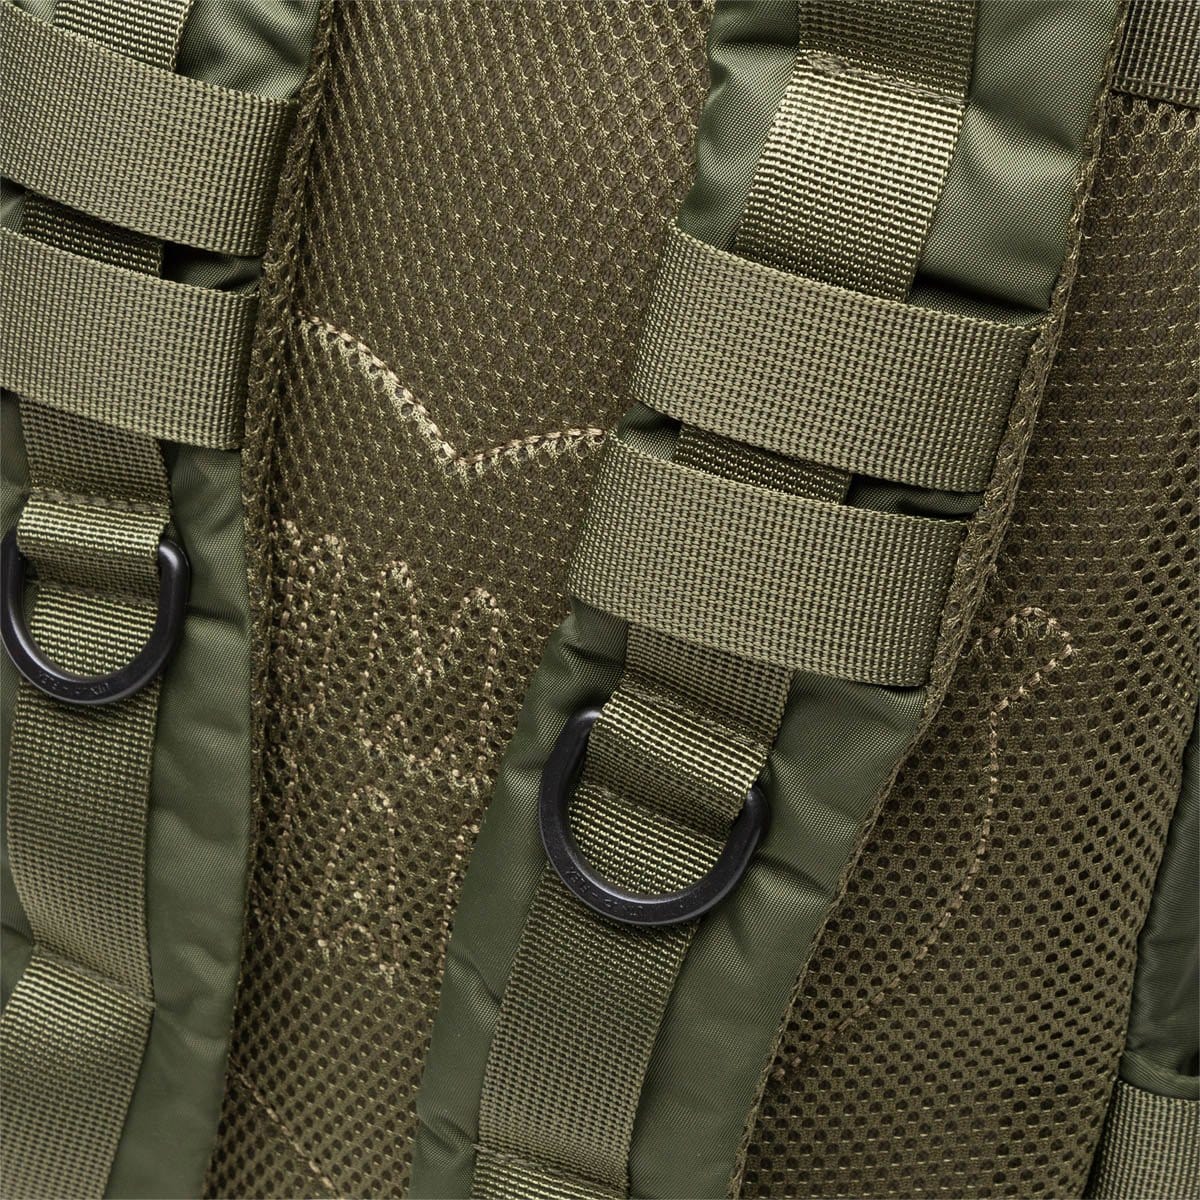 Human Made Bags OLIVE DRAB / O/S MILITARY BACK PACK